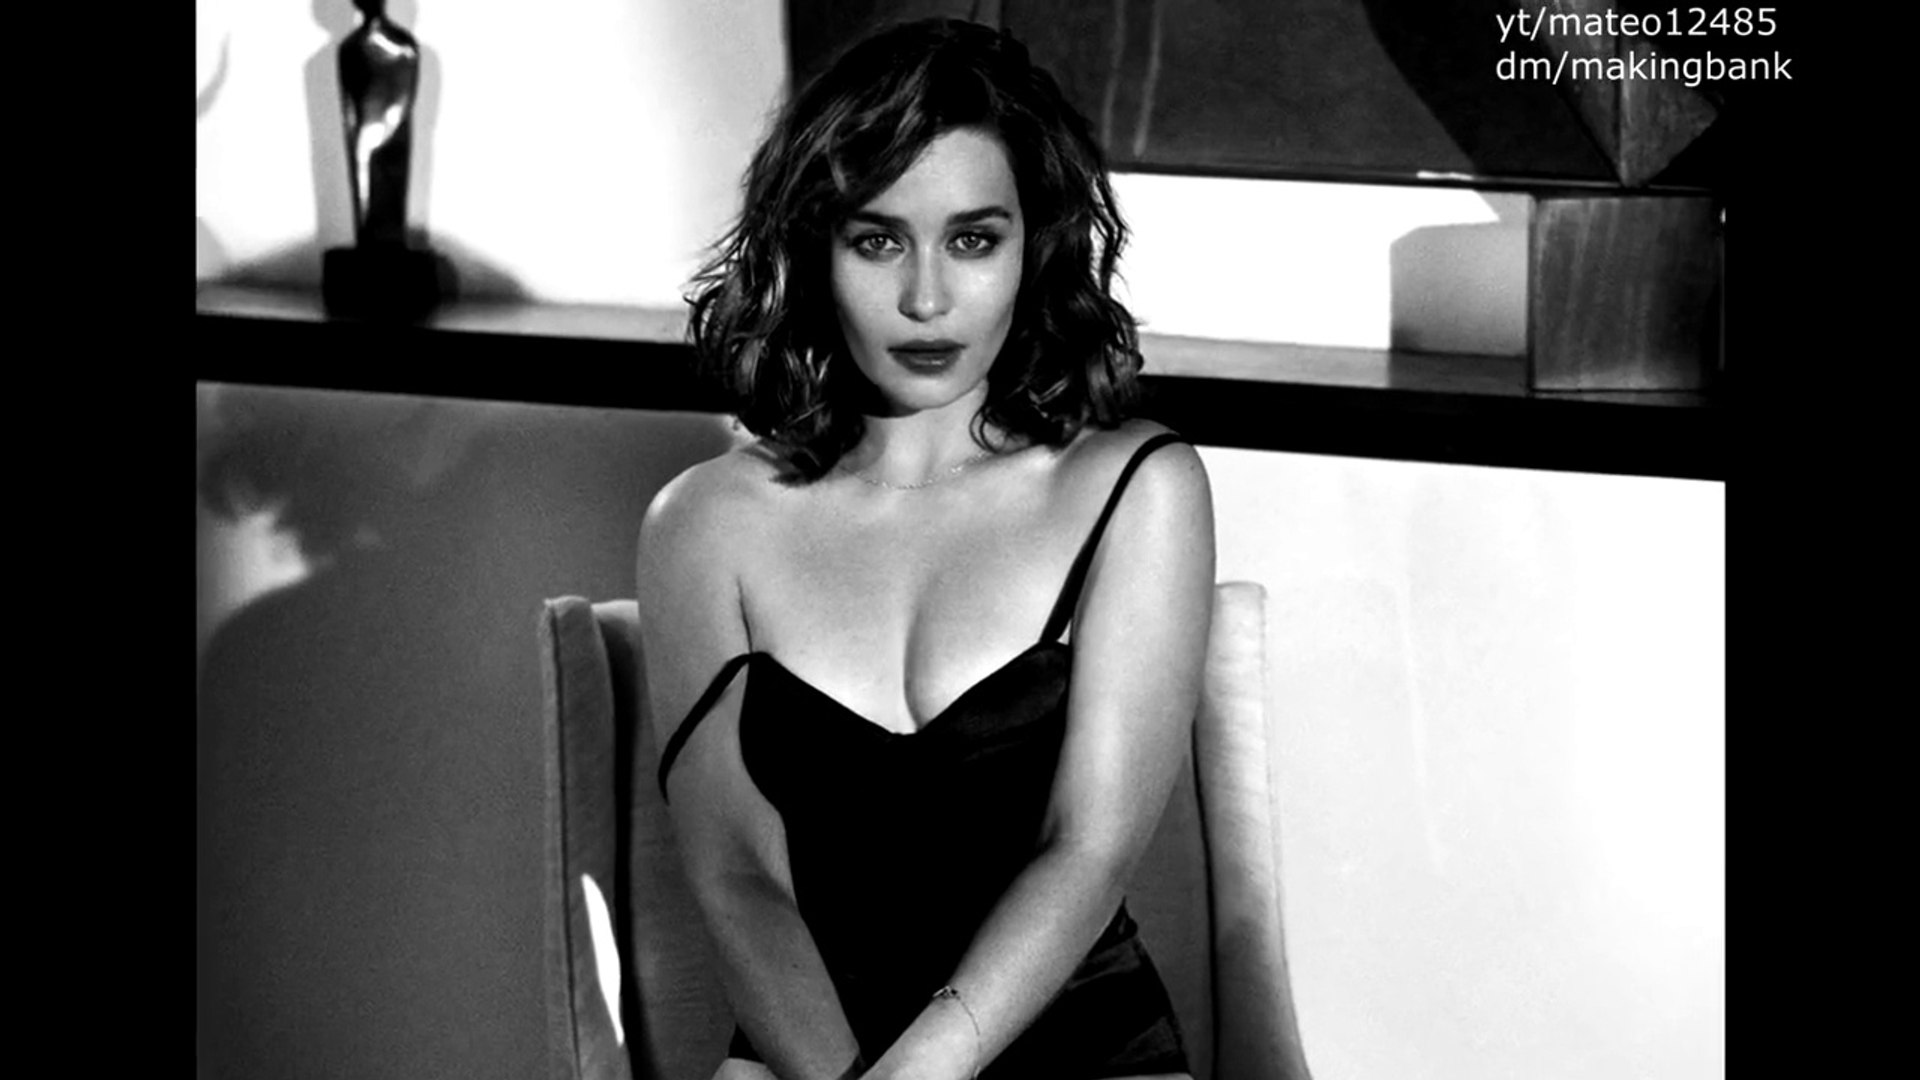 Emilia Clarke Hot & Sexy Esquire Photoshoot FULL - Sexiest Woman Alive 2015  - HD - Dailymotion Video